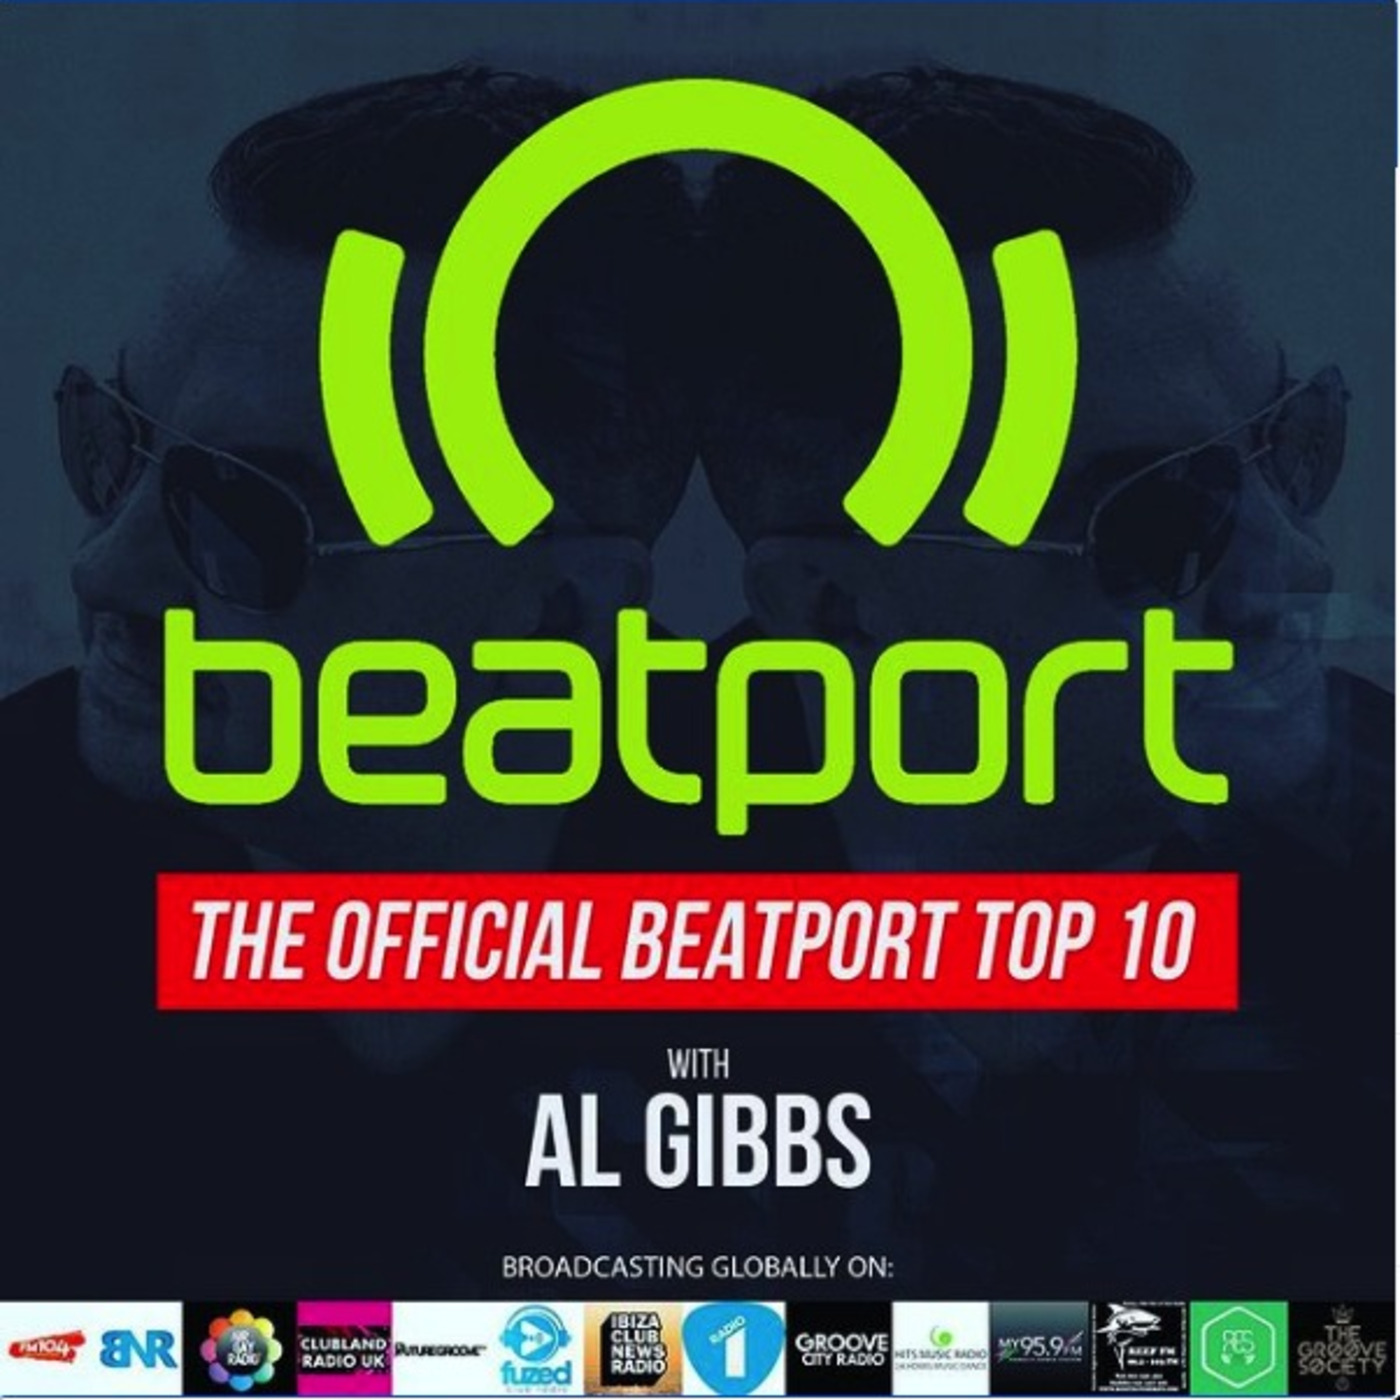 Episode 65: THE OFFICIAL BEATPORT TOP 10 WITH AL GIBBS (Week 13 2021)